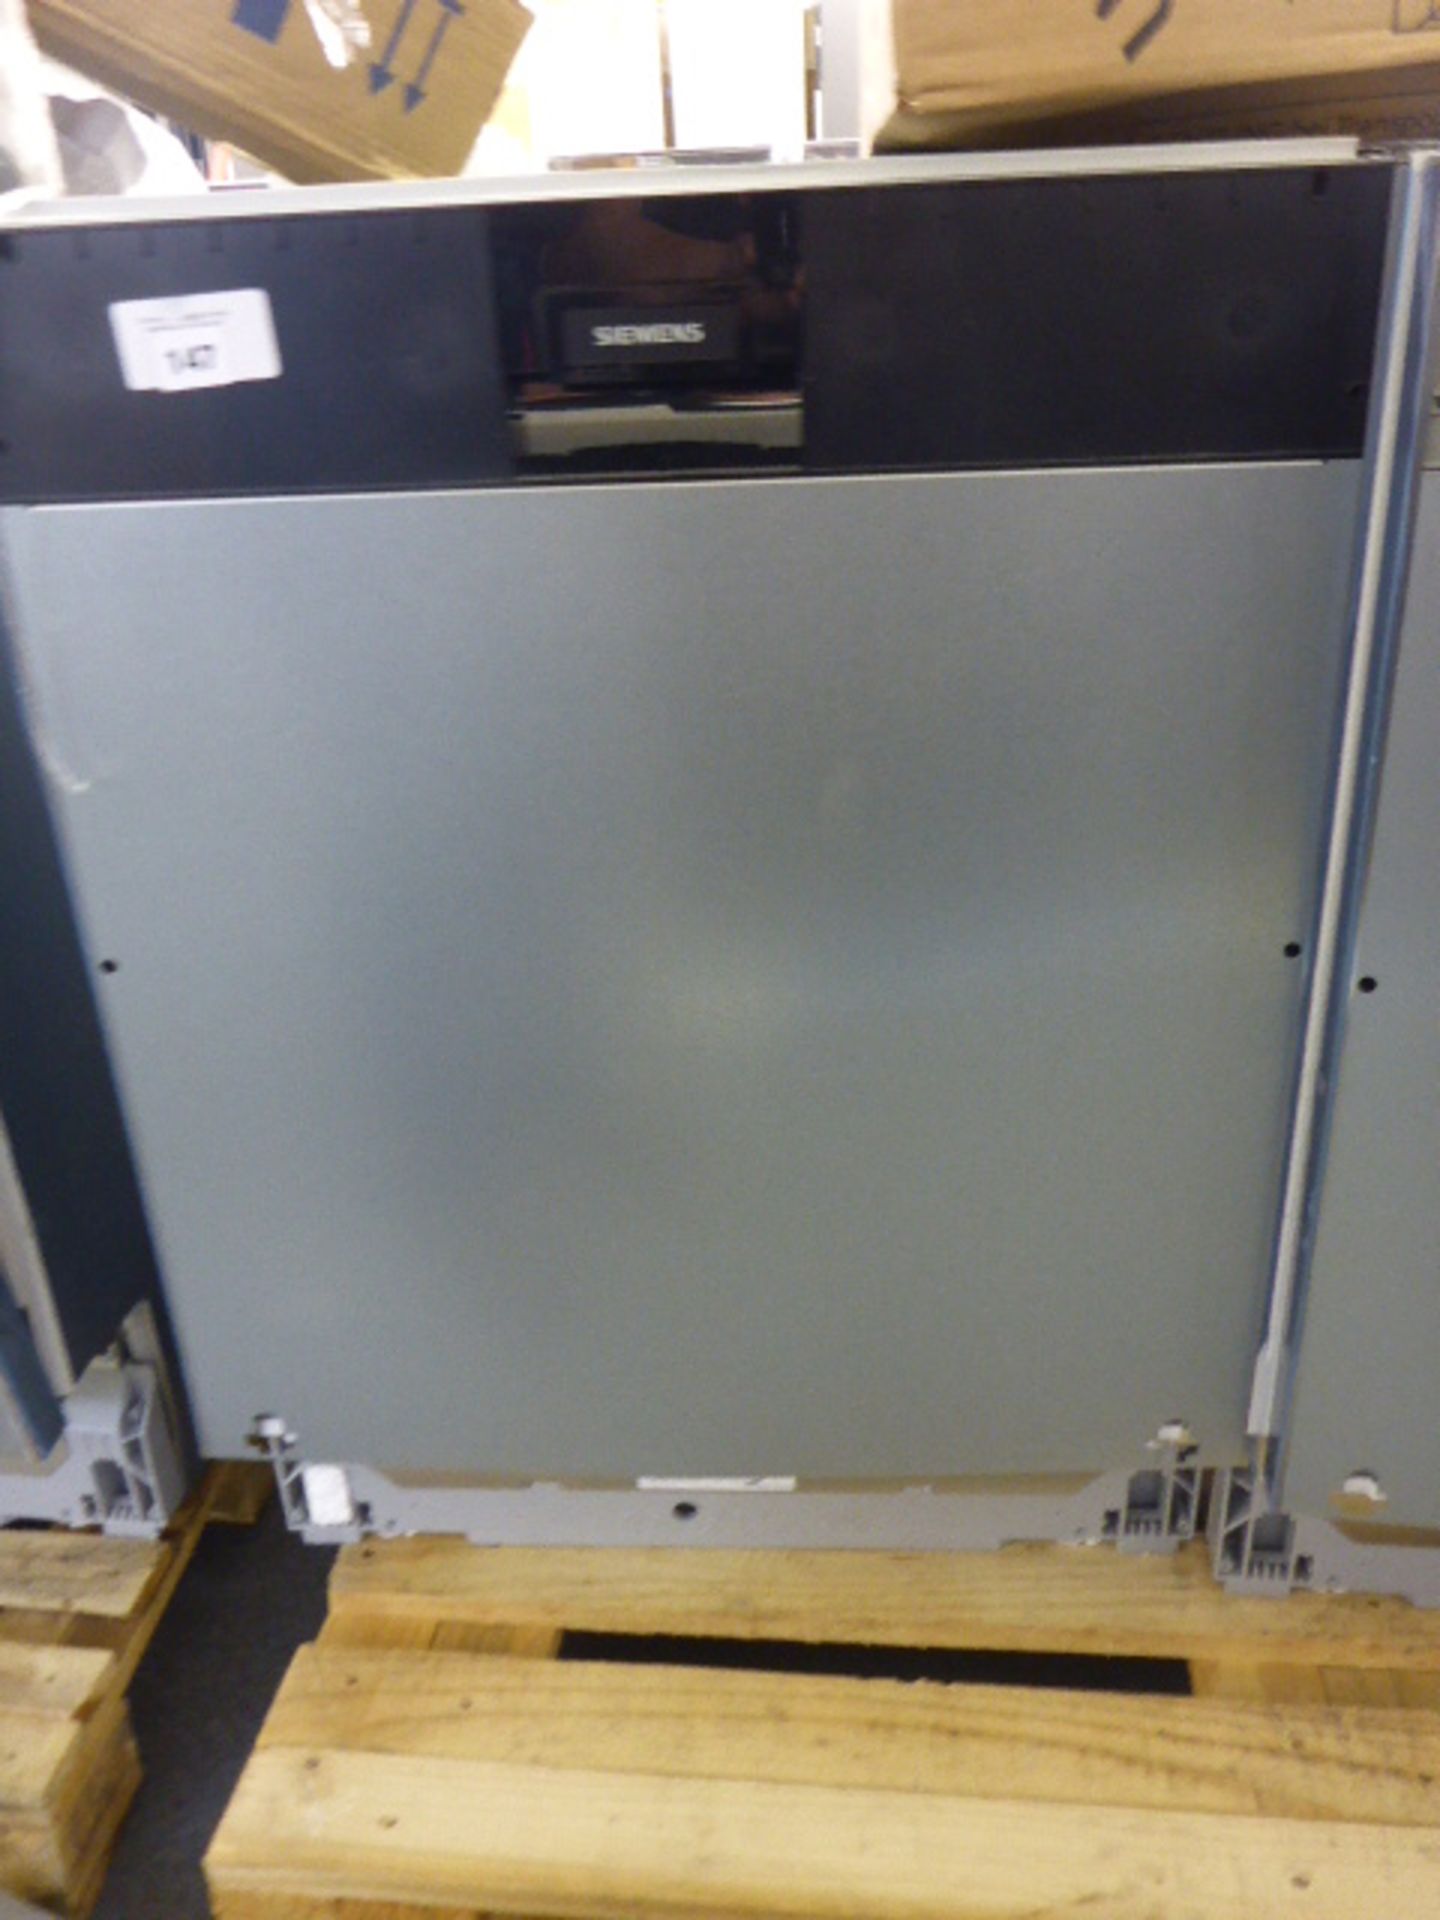 SN658D02MGB Siemens Dishwasher fully integrated